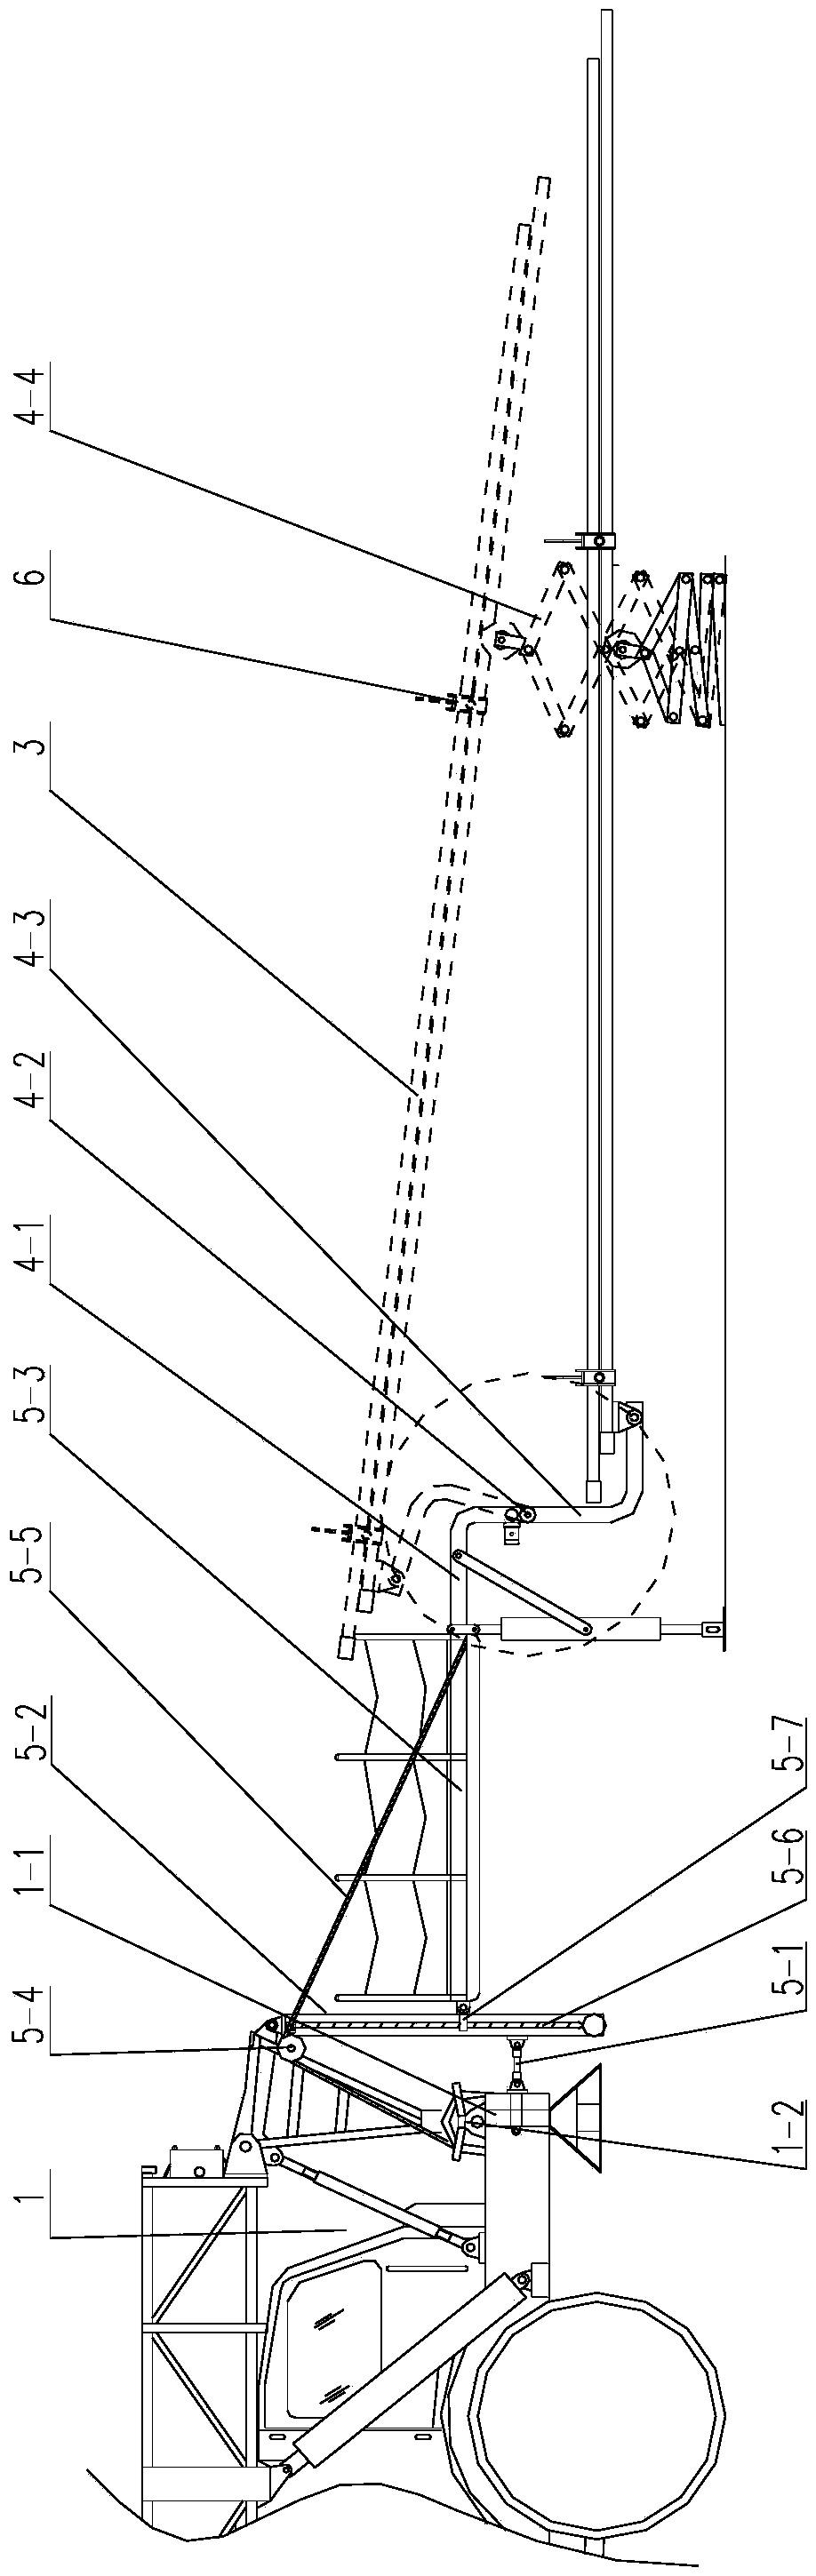 Automatic control operating platform used for workover rig and provided with automatic tubing string pulling system